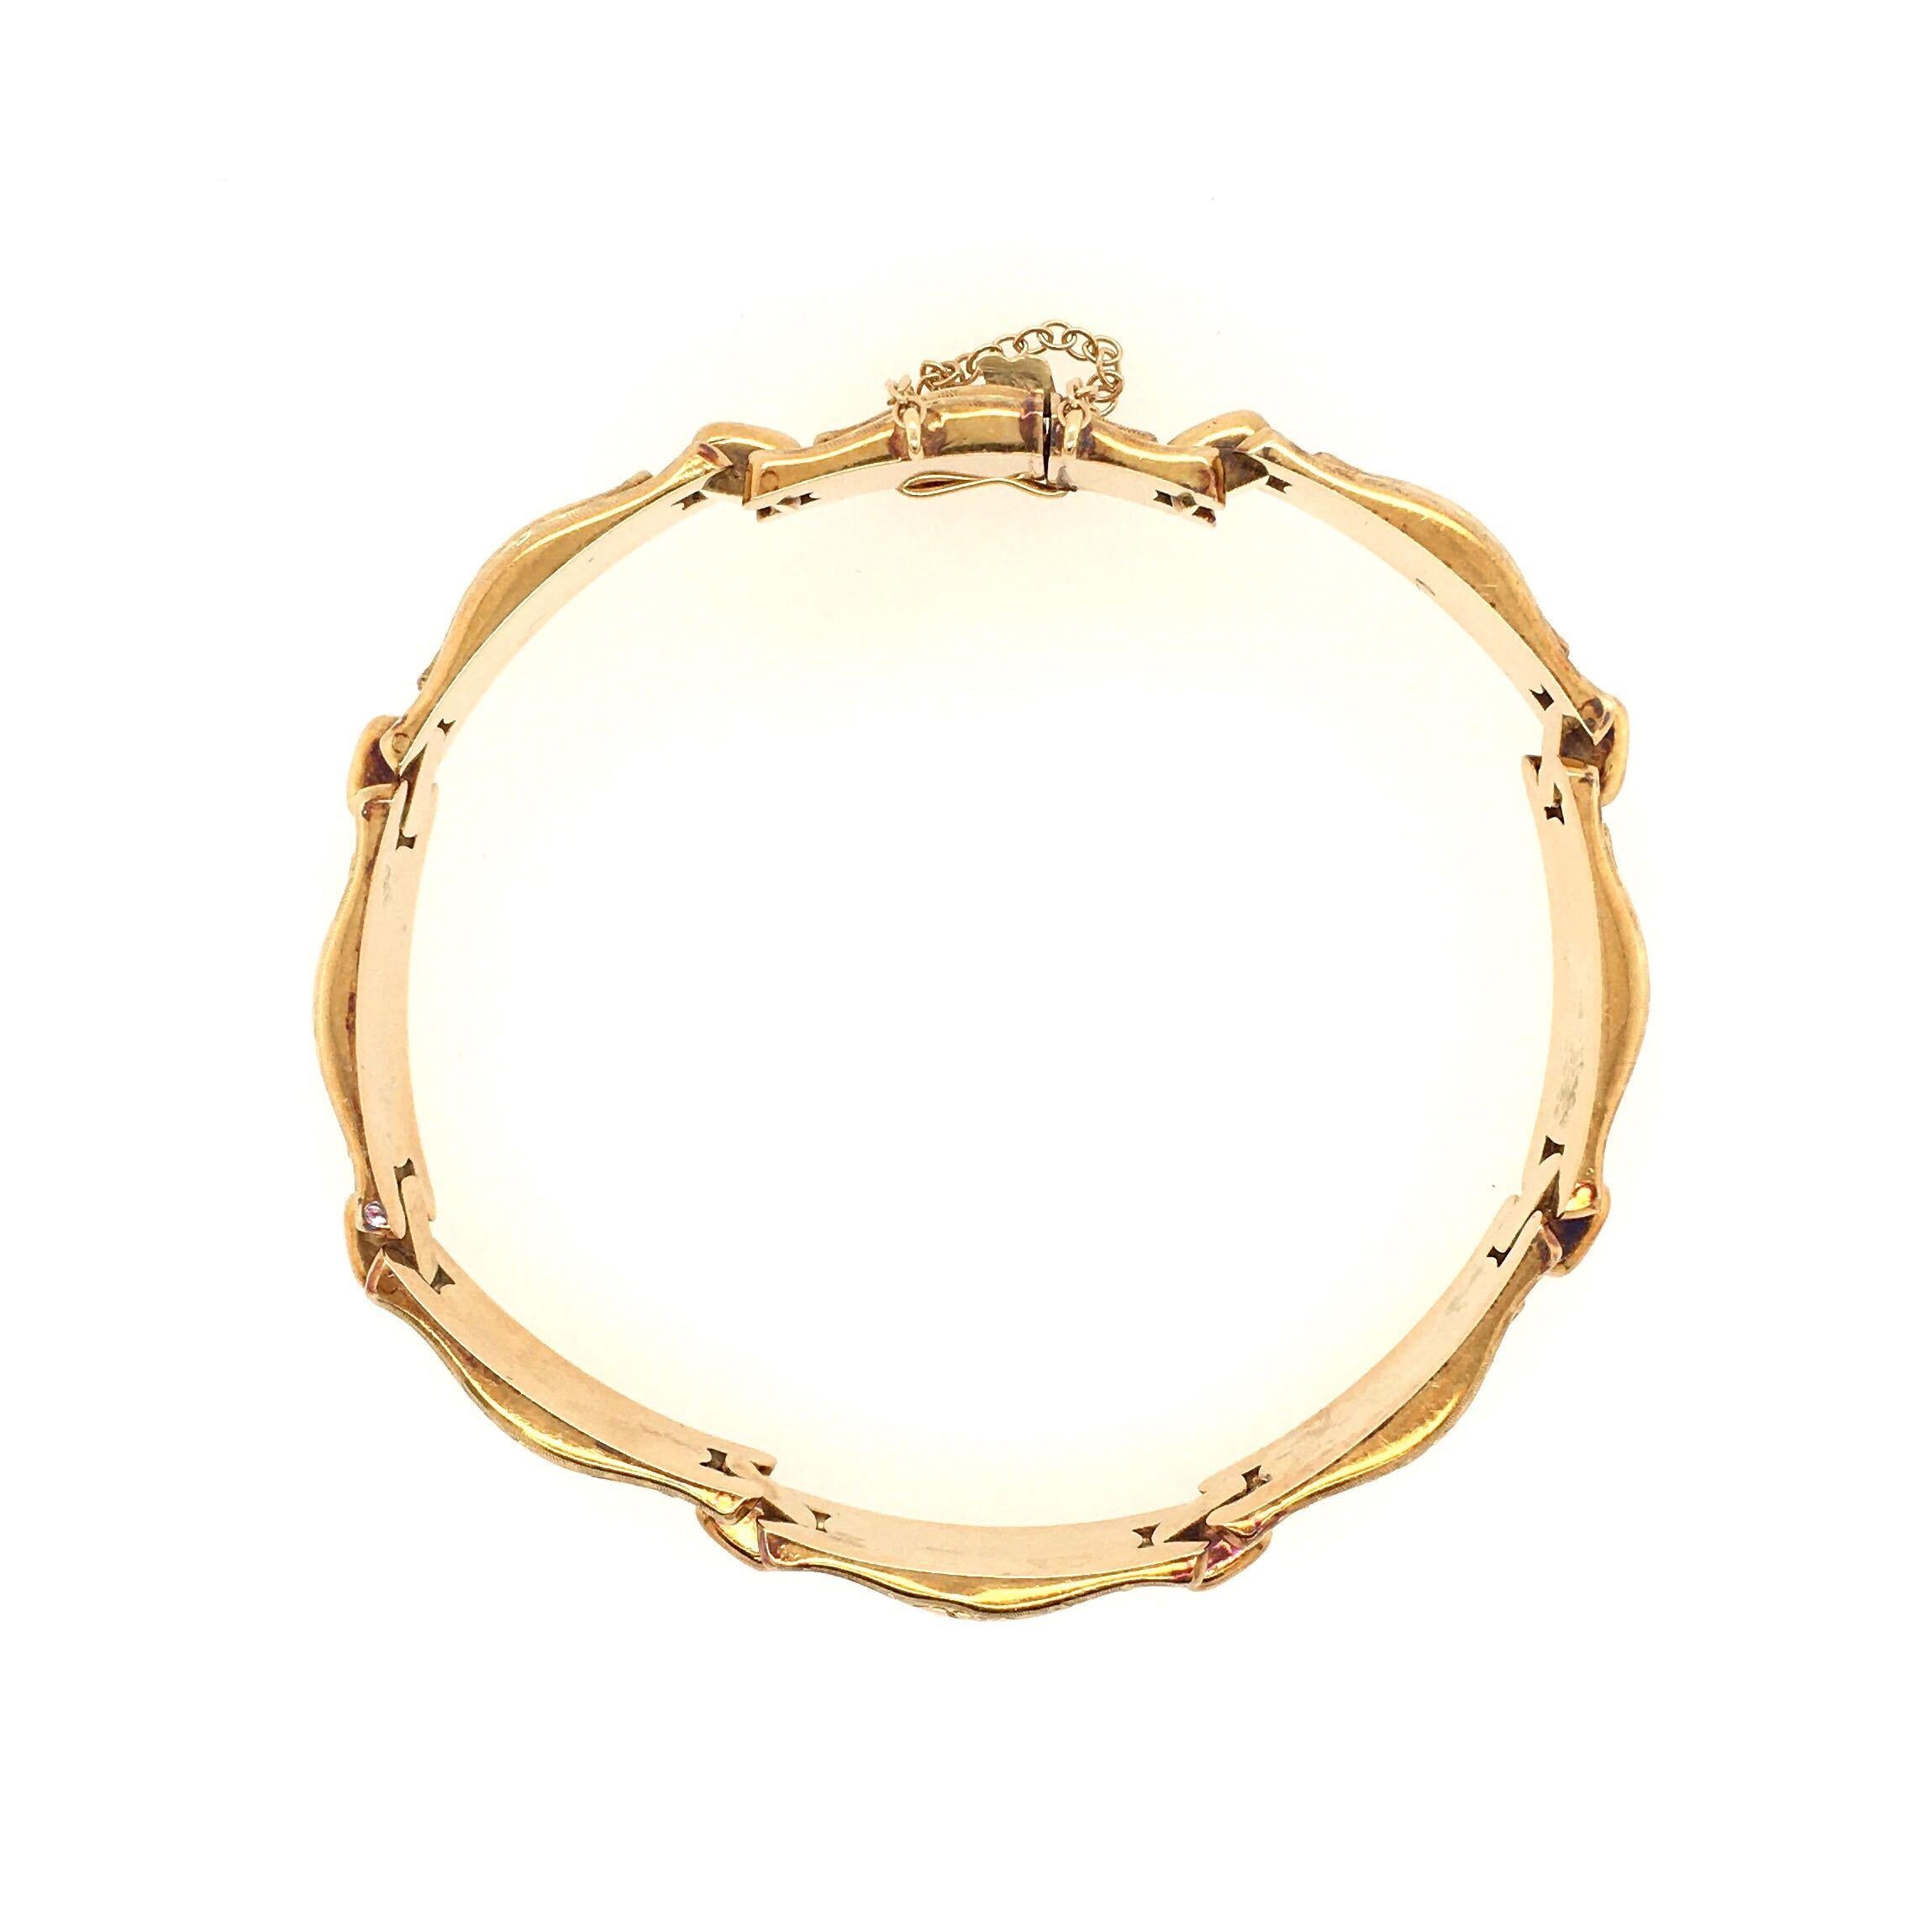 A 14 karat yellow gold bracelet . Designed as engraved links. Length is approximately 7 1/4 inches, gross weight is approximately 19.2 grams. 